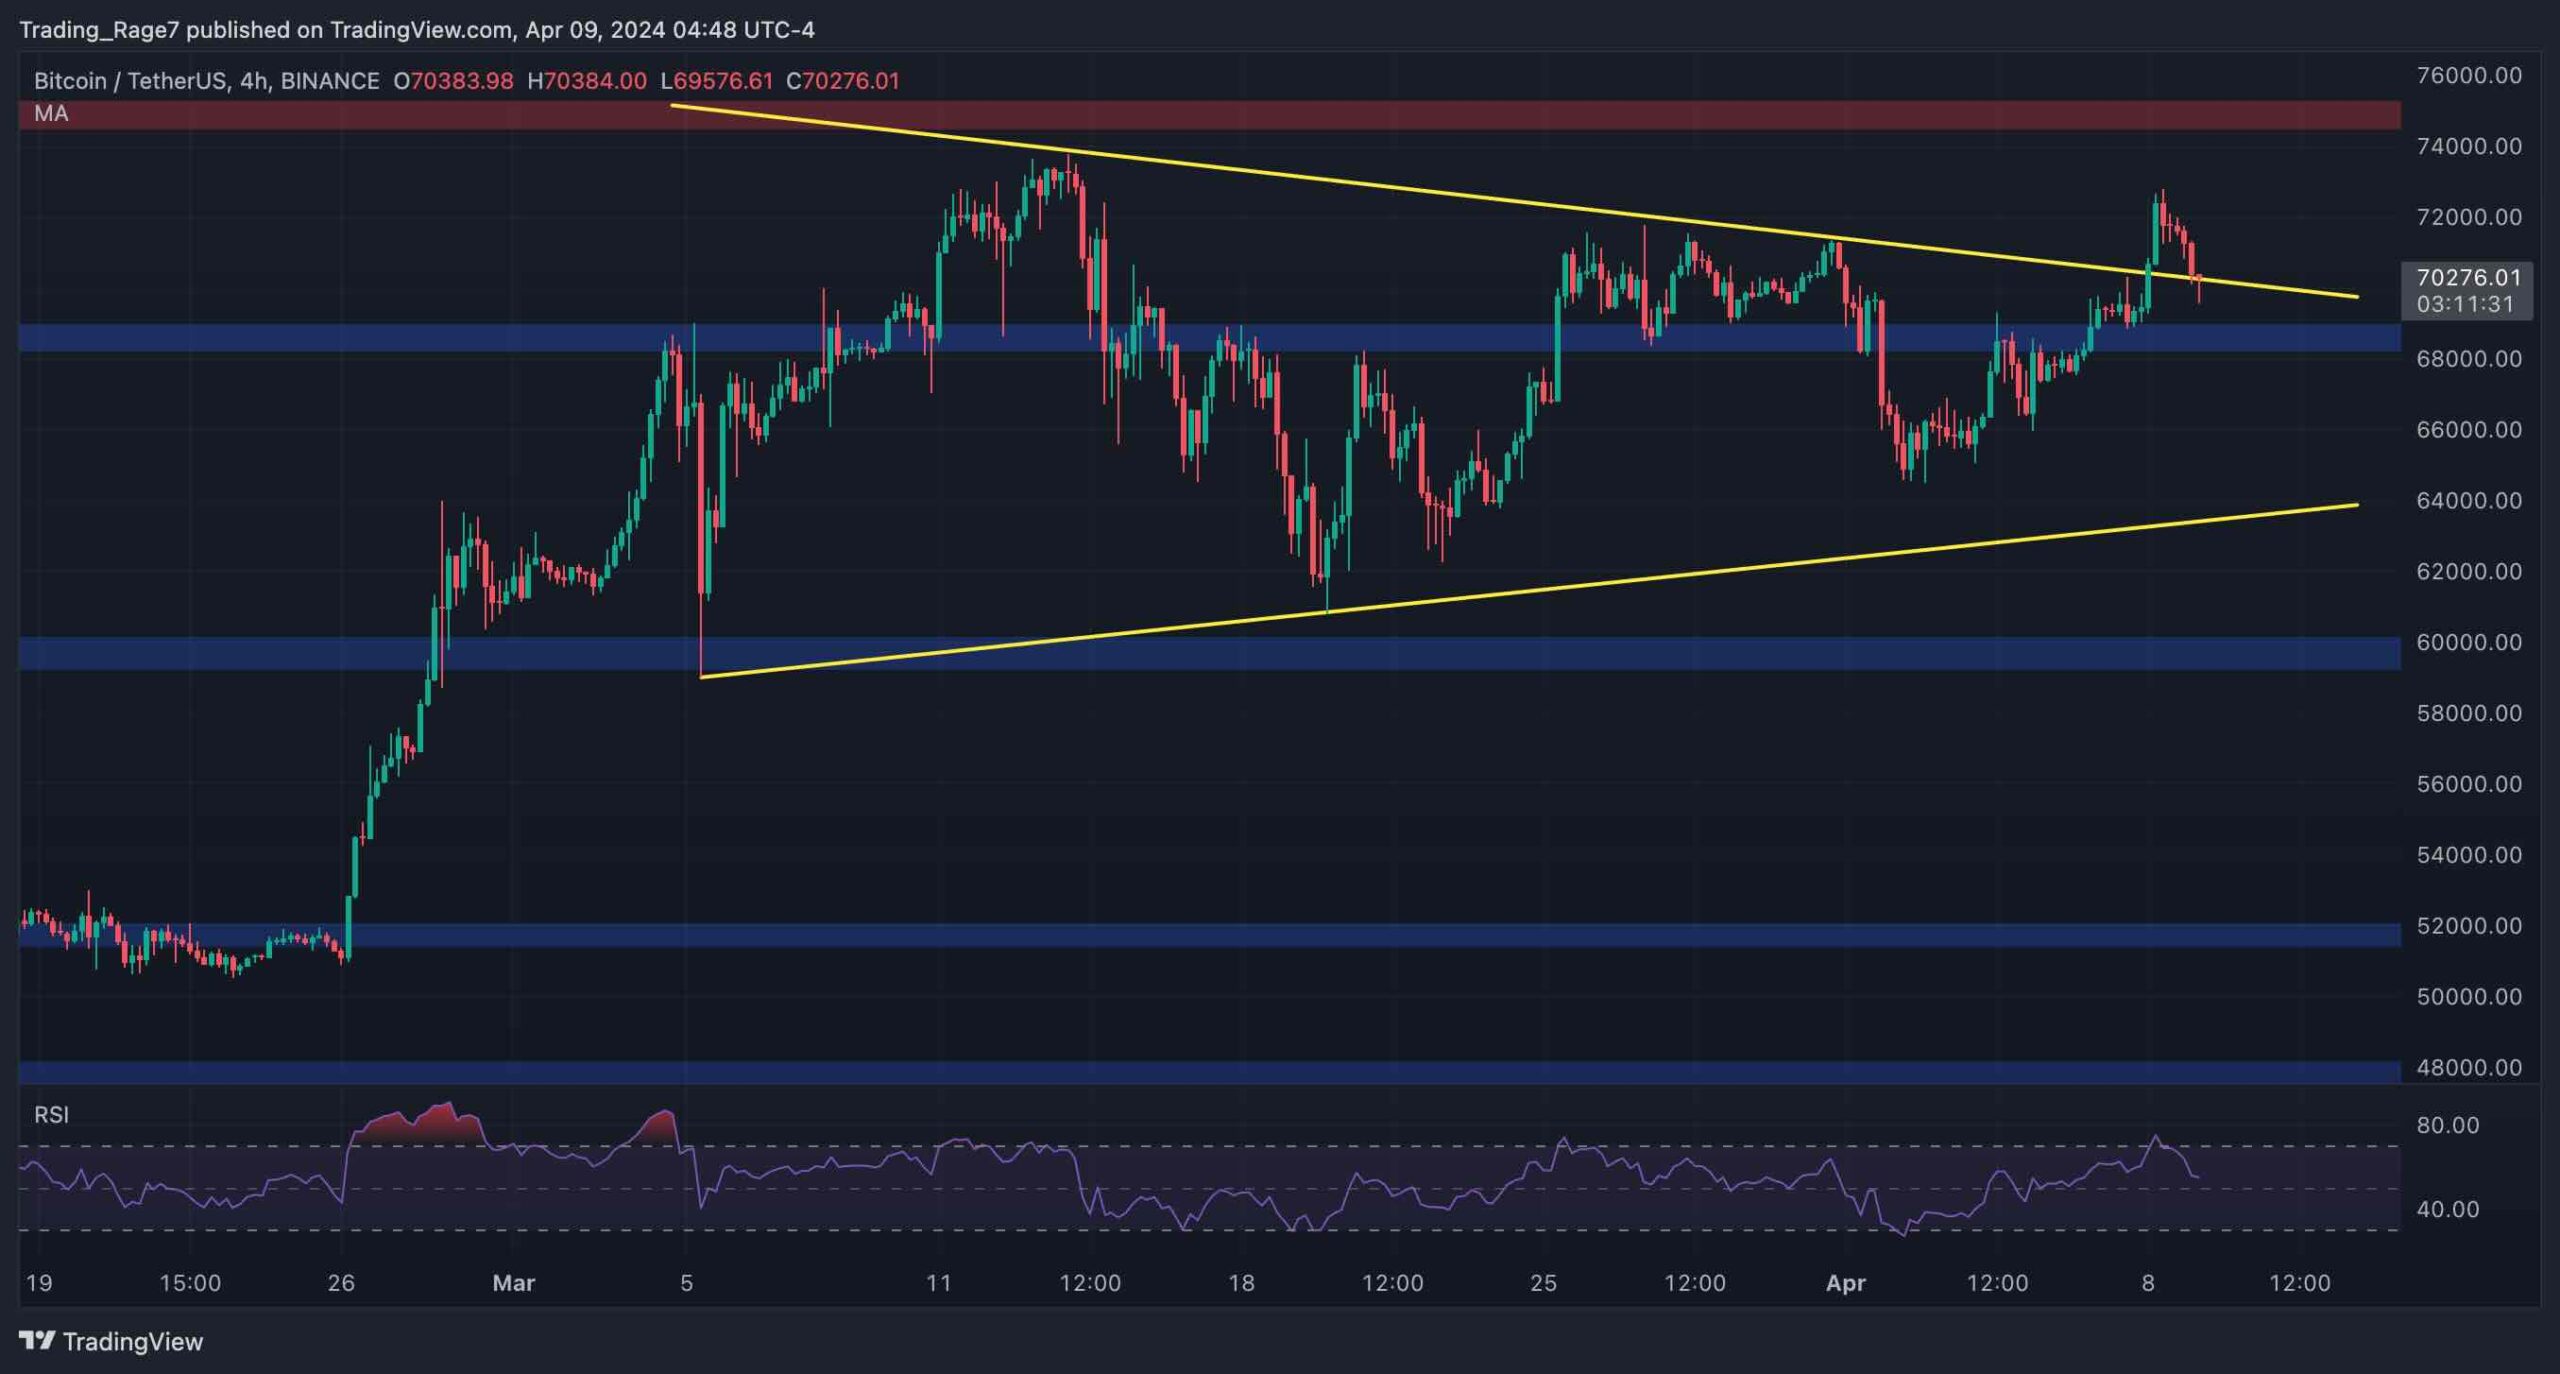 Bitcoin Itching for a New All-Time High But Bears Defend $72K (BTC Price Analysis)